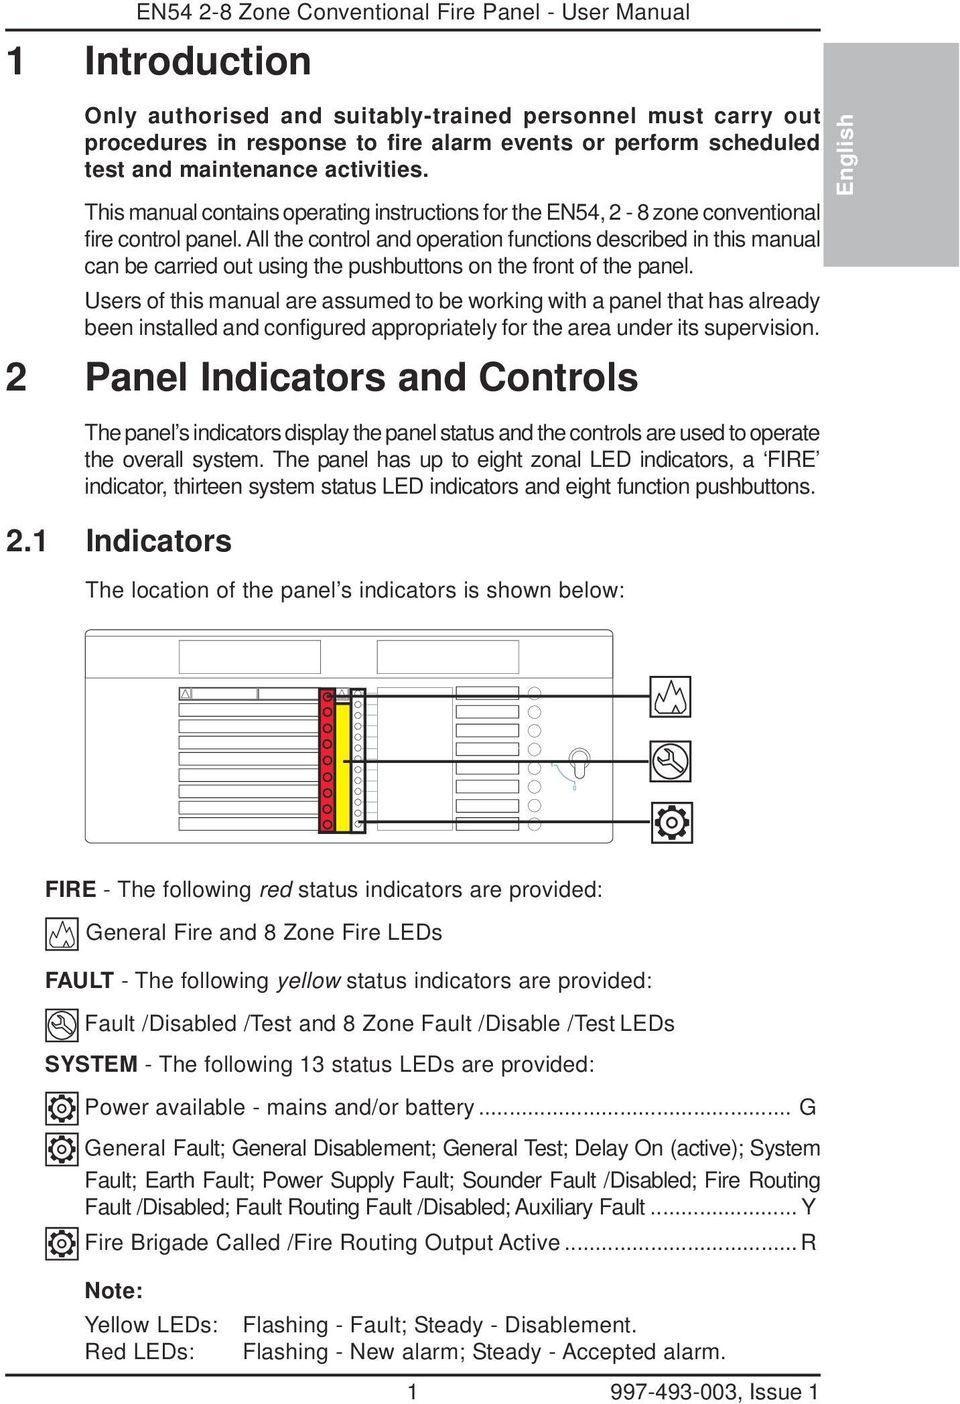 All the control and operation functions described in this manual can be carried out using the pushbuttons on the front of the panel.